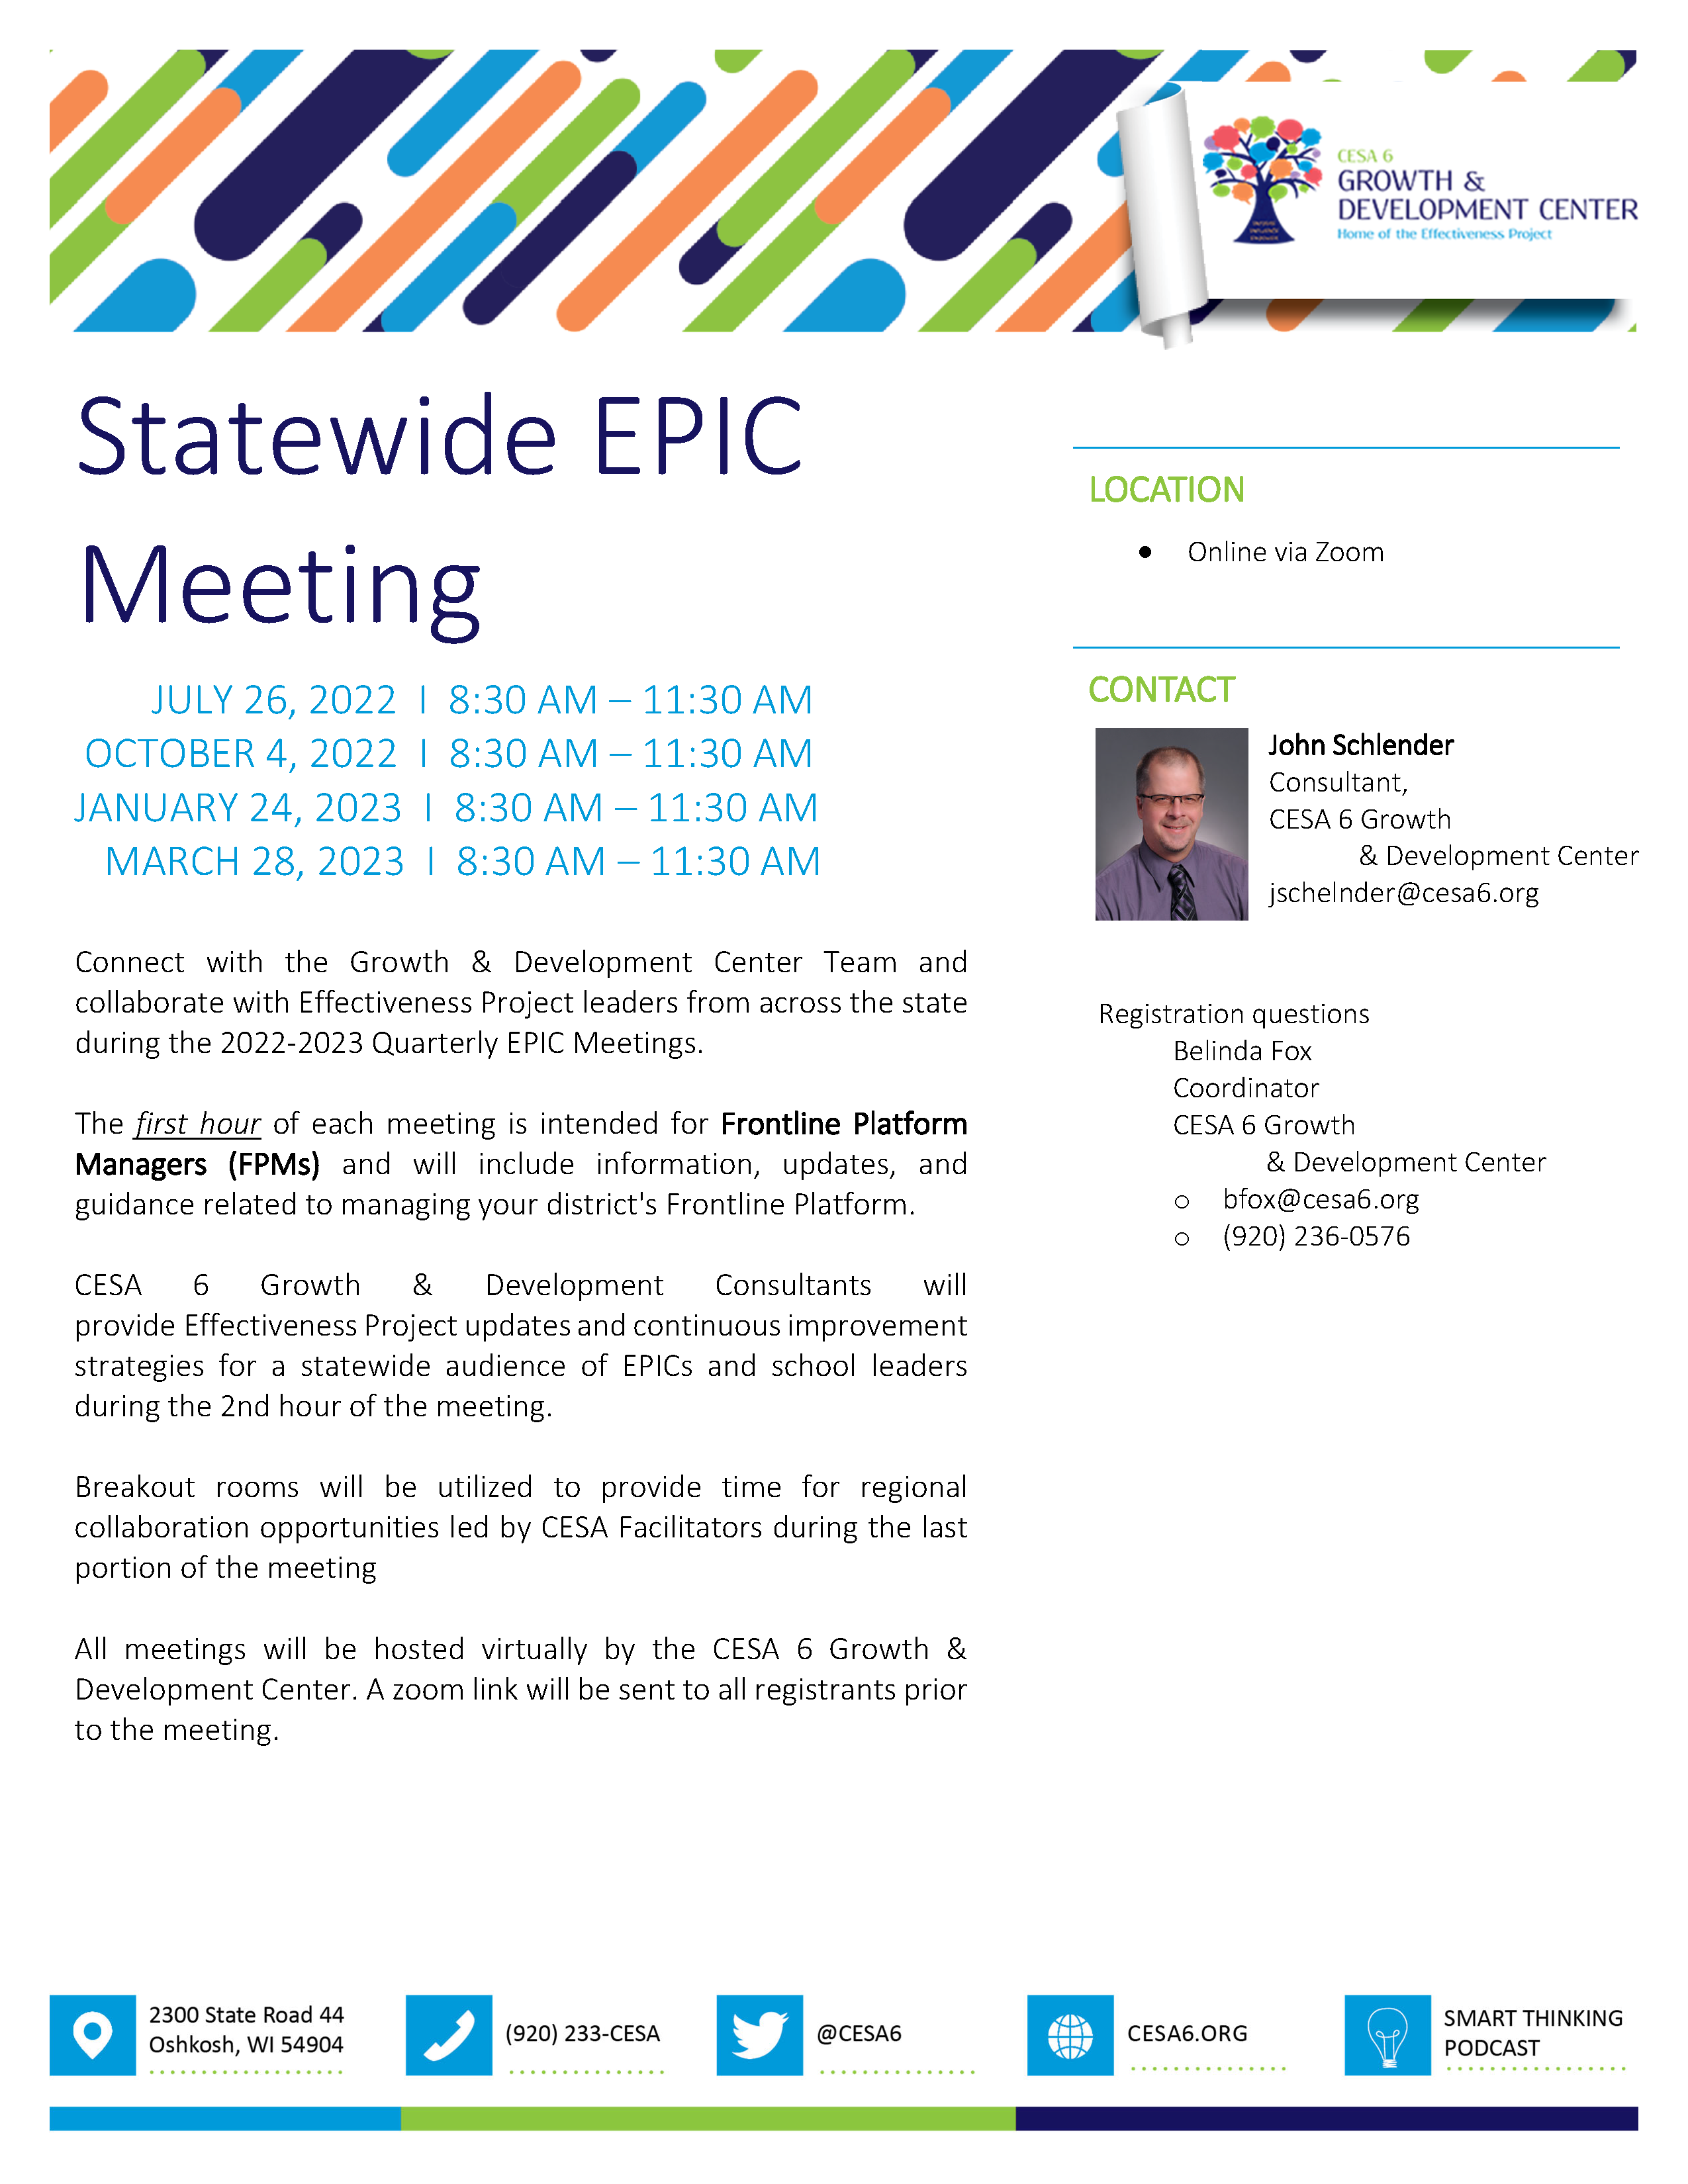 Statewide EPIC Meeting flyer